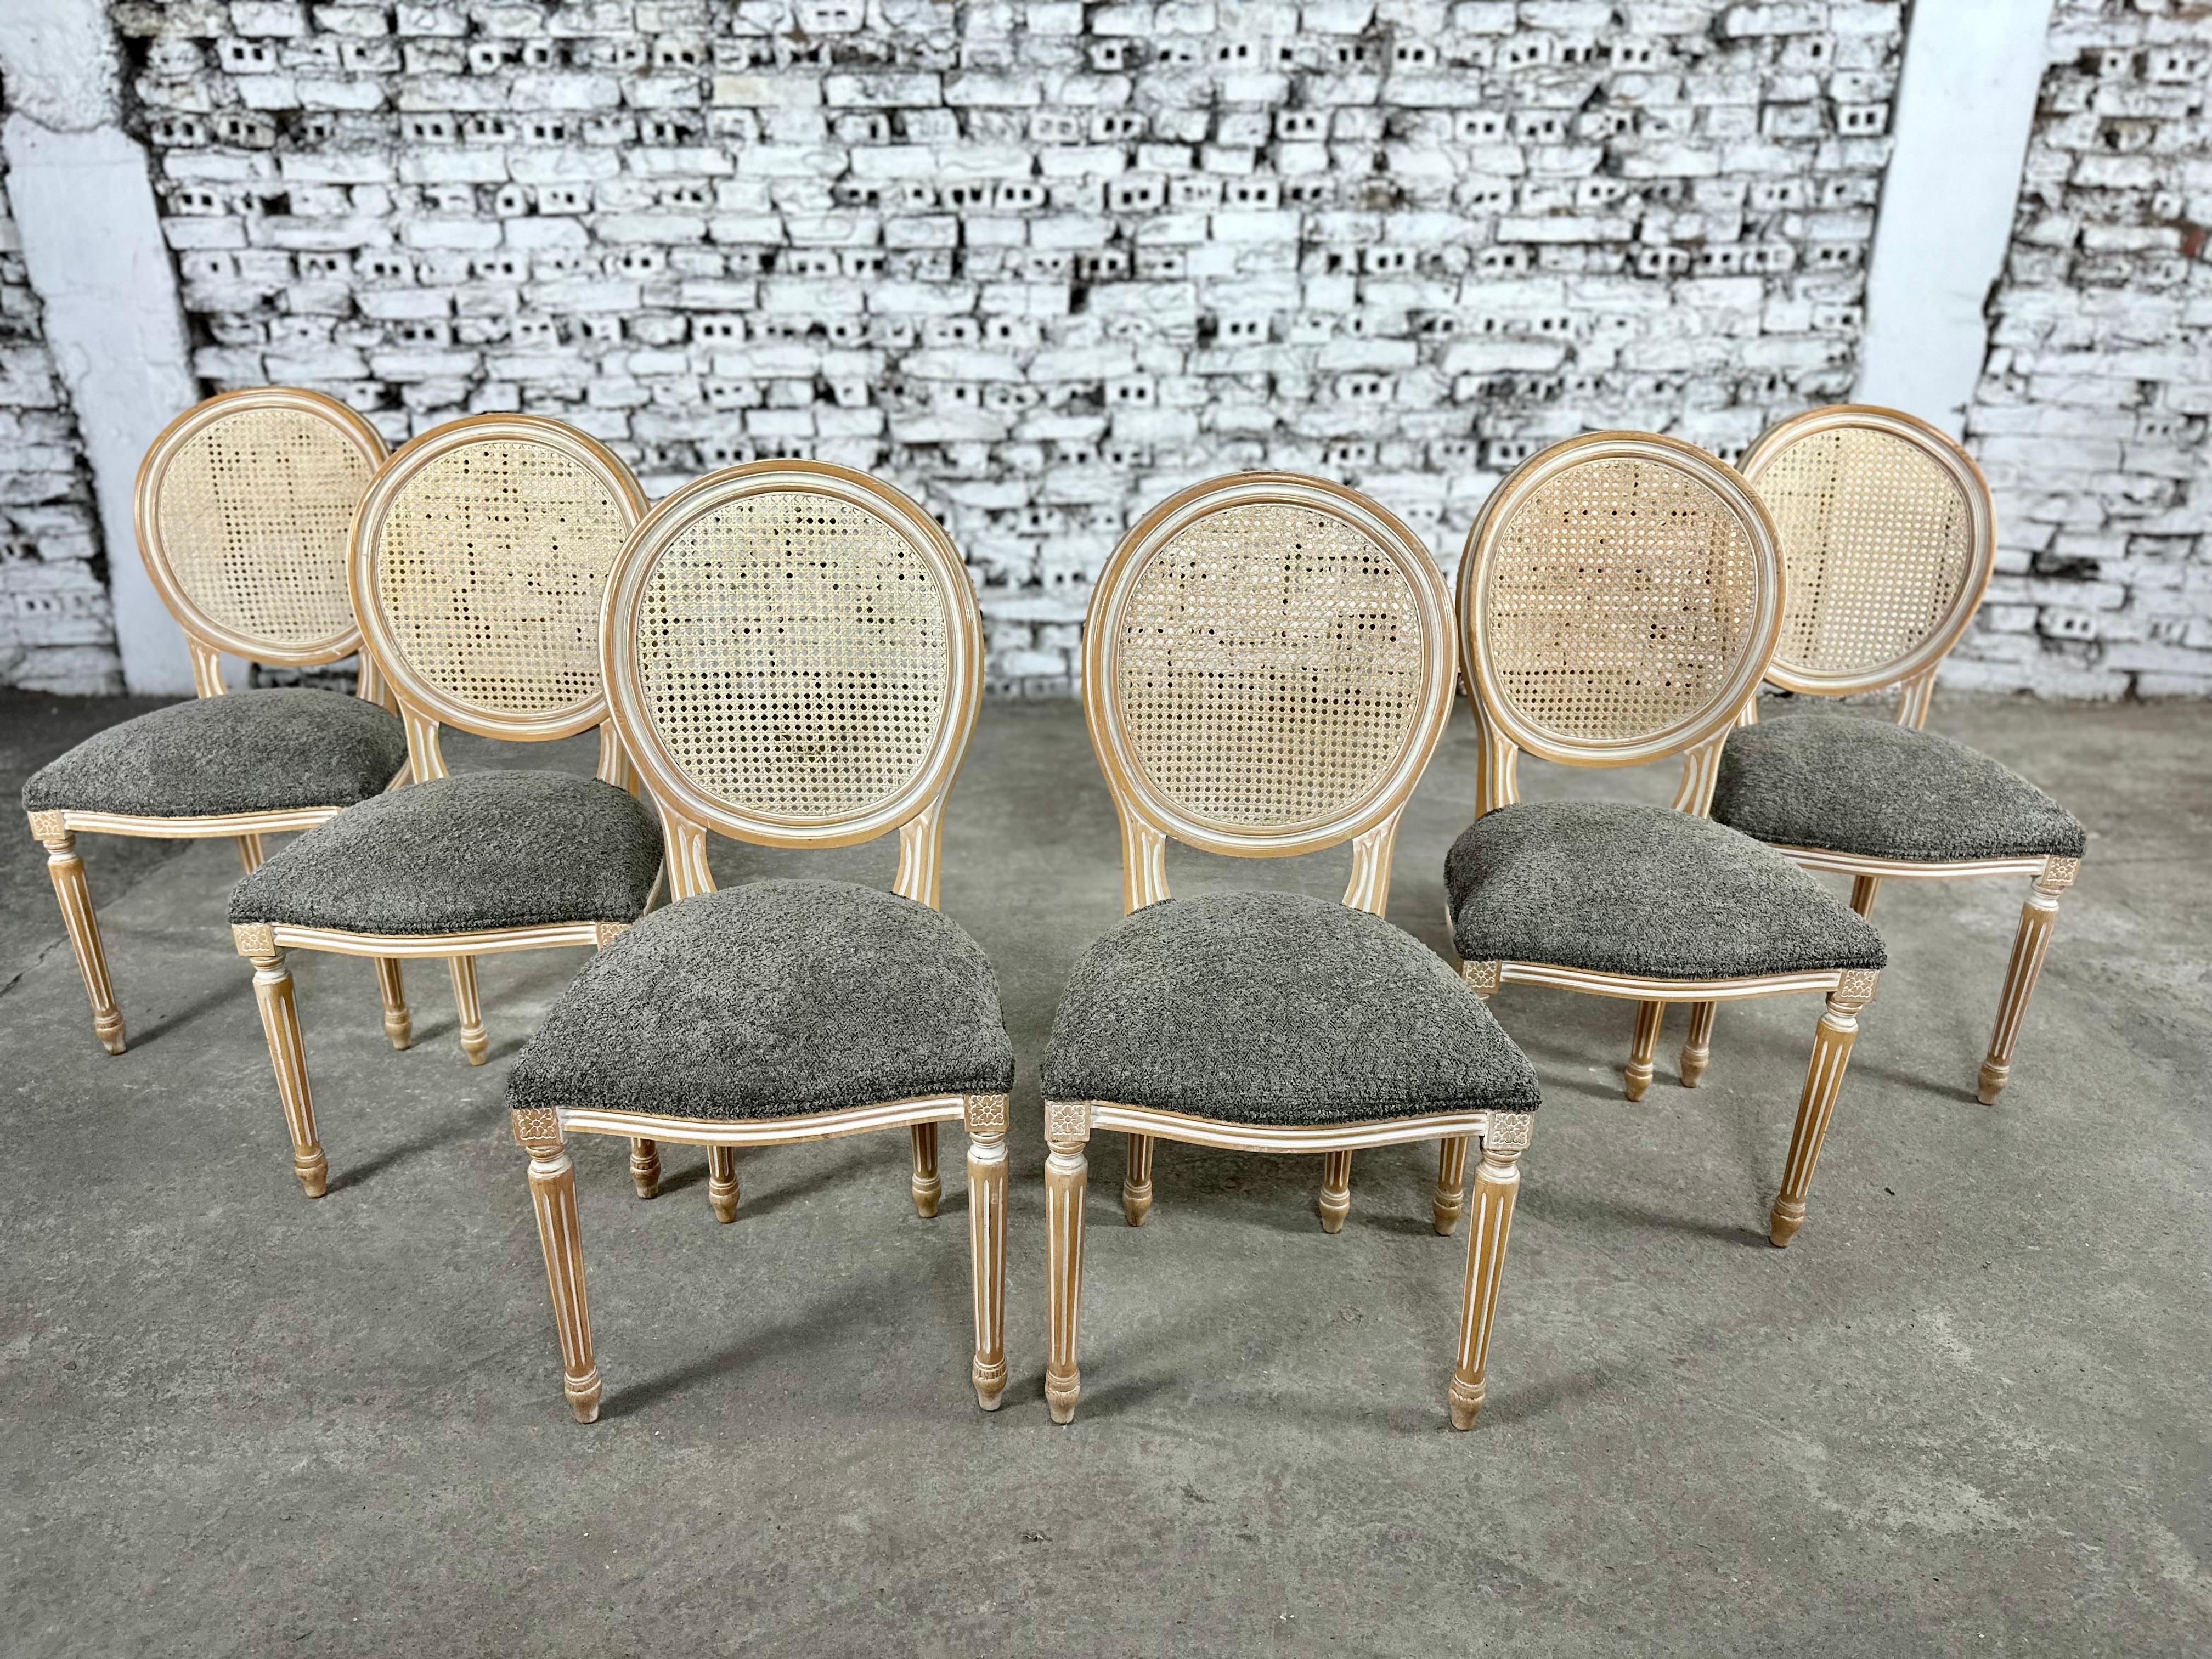 20th Century Louis XVI Medallion Cane Back Dining Chairs, Reupholstered - Set of 6 For Sale